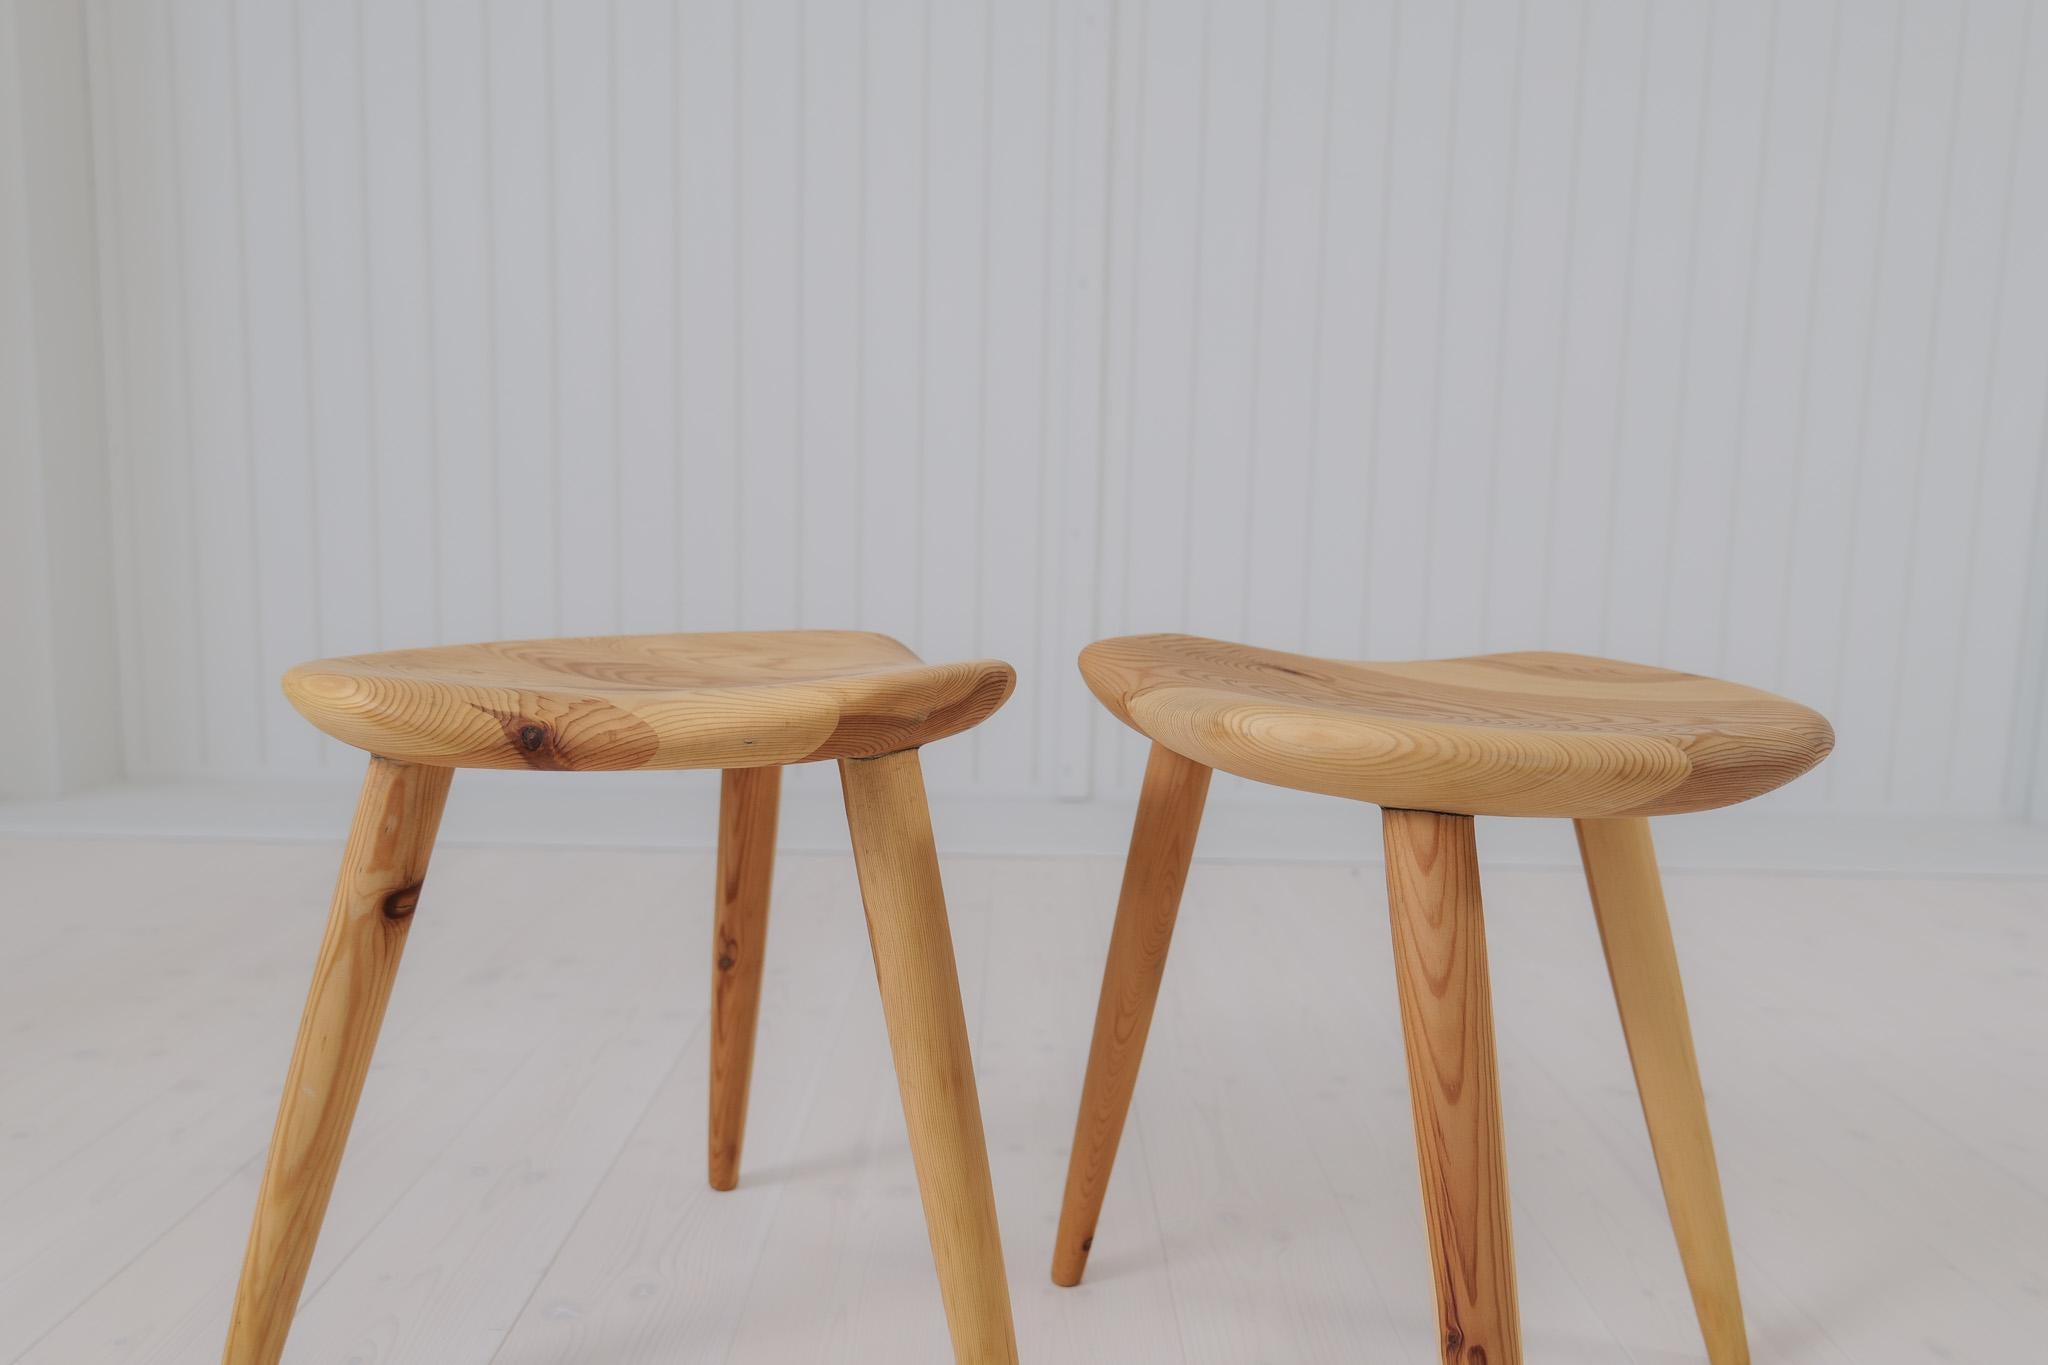 Mid-20th Century Midcentury Modern Pair Sculptural Stools in Pine by Norsk Husflid 1960s Norway For Sale